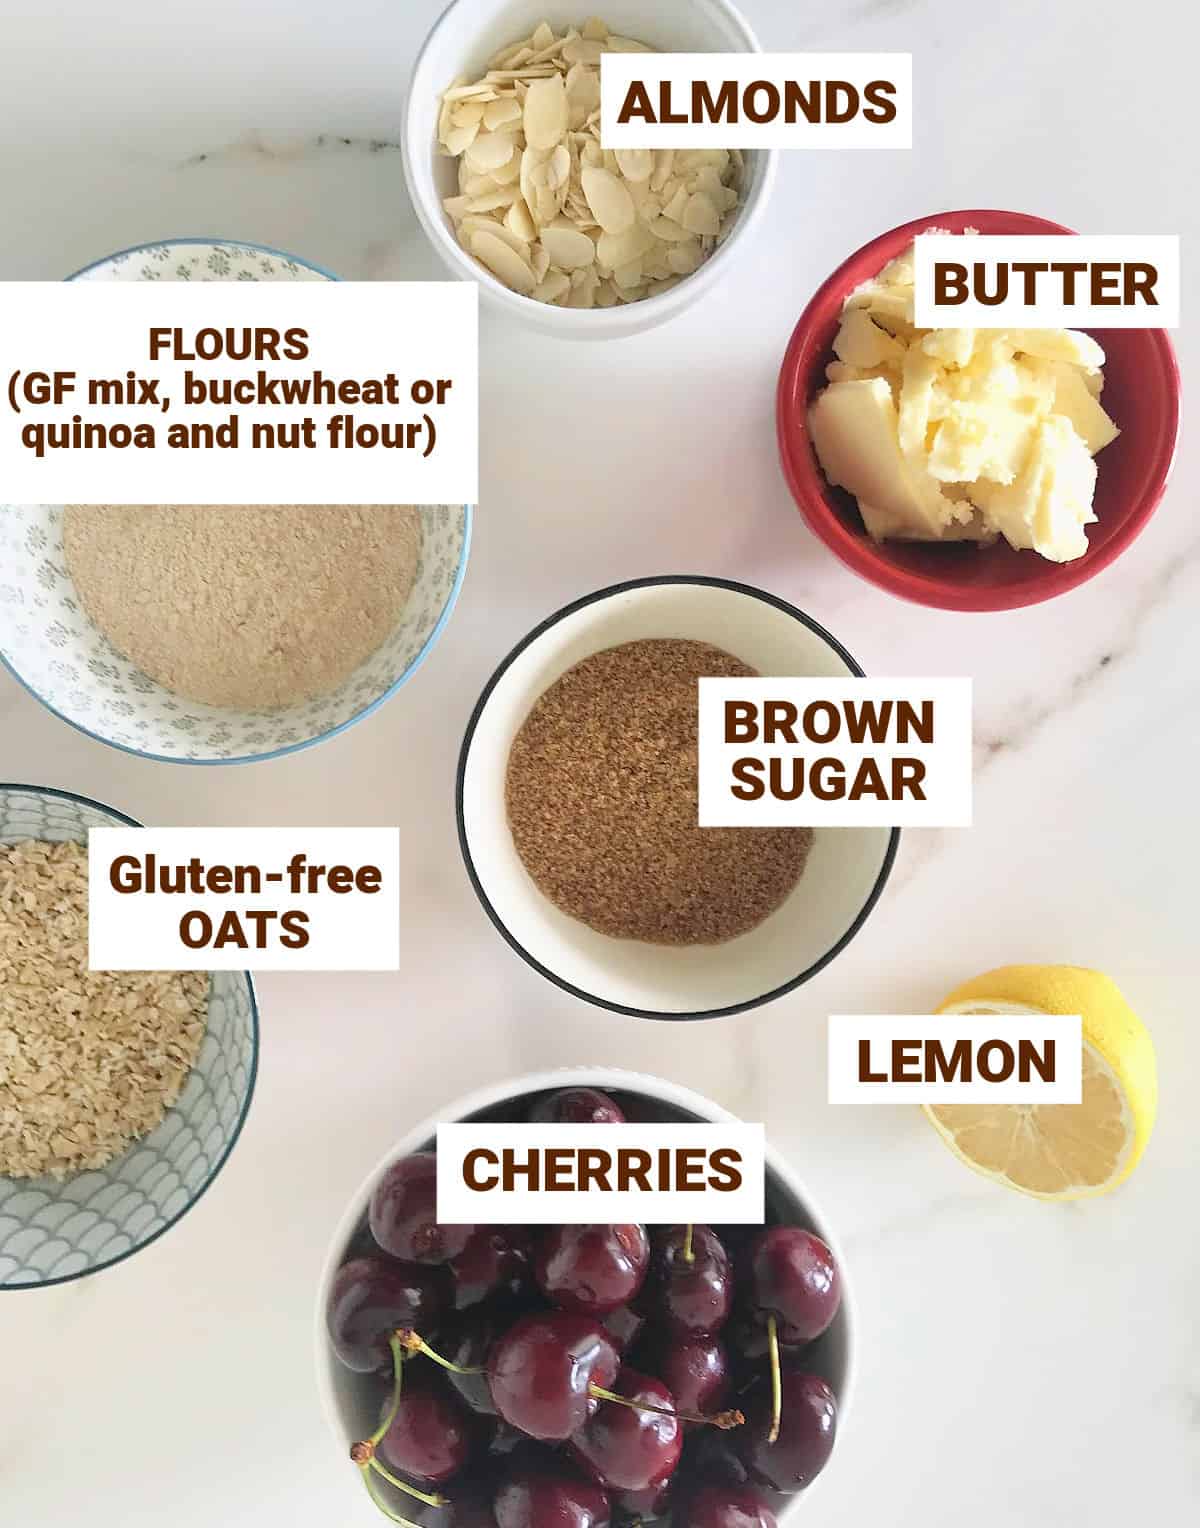 Colorful bowls on white surface with ingredients for almond cherry crisp including lemon, butter, brown sugar, oats.